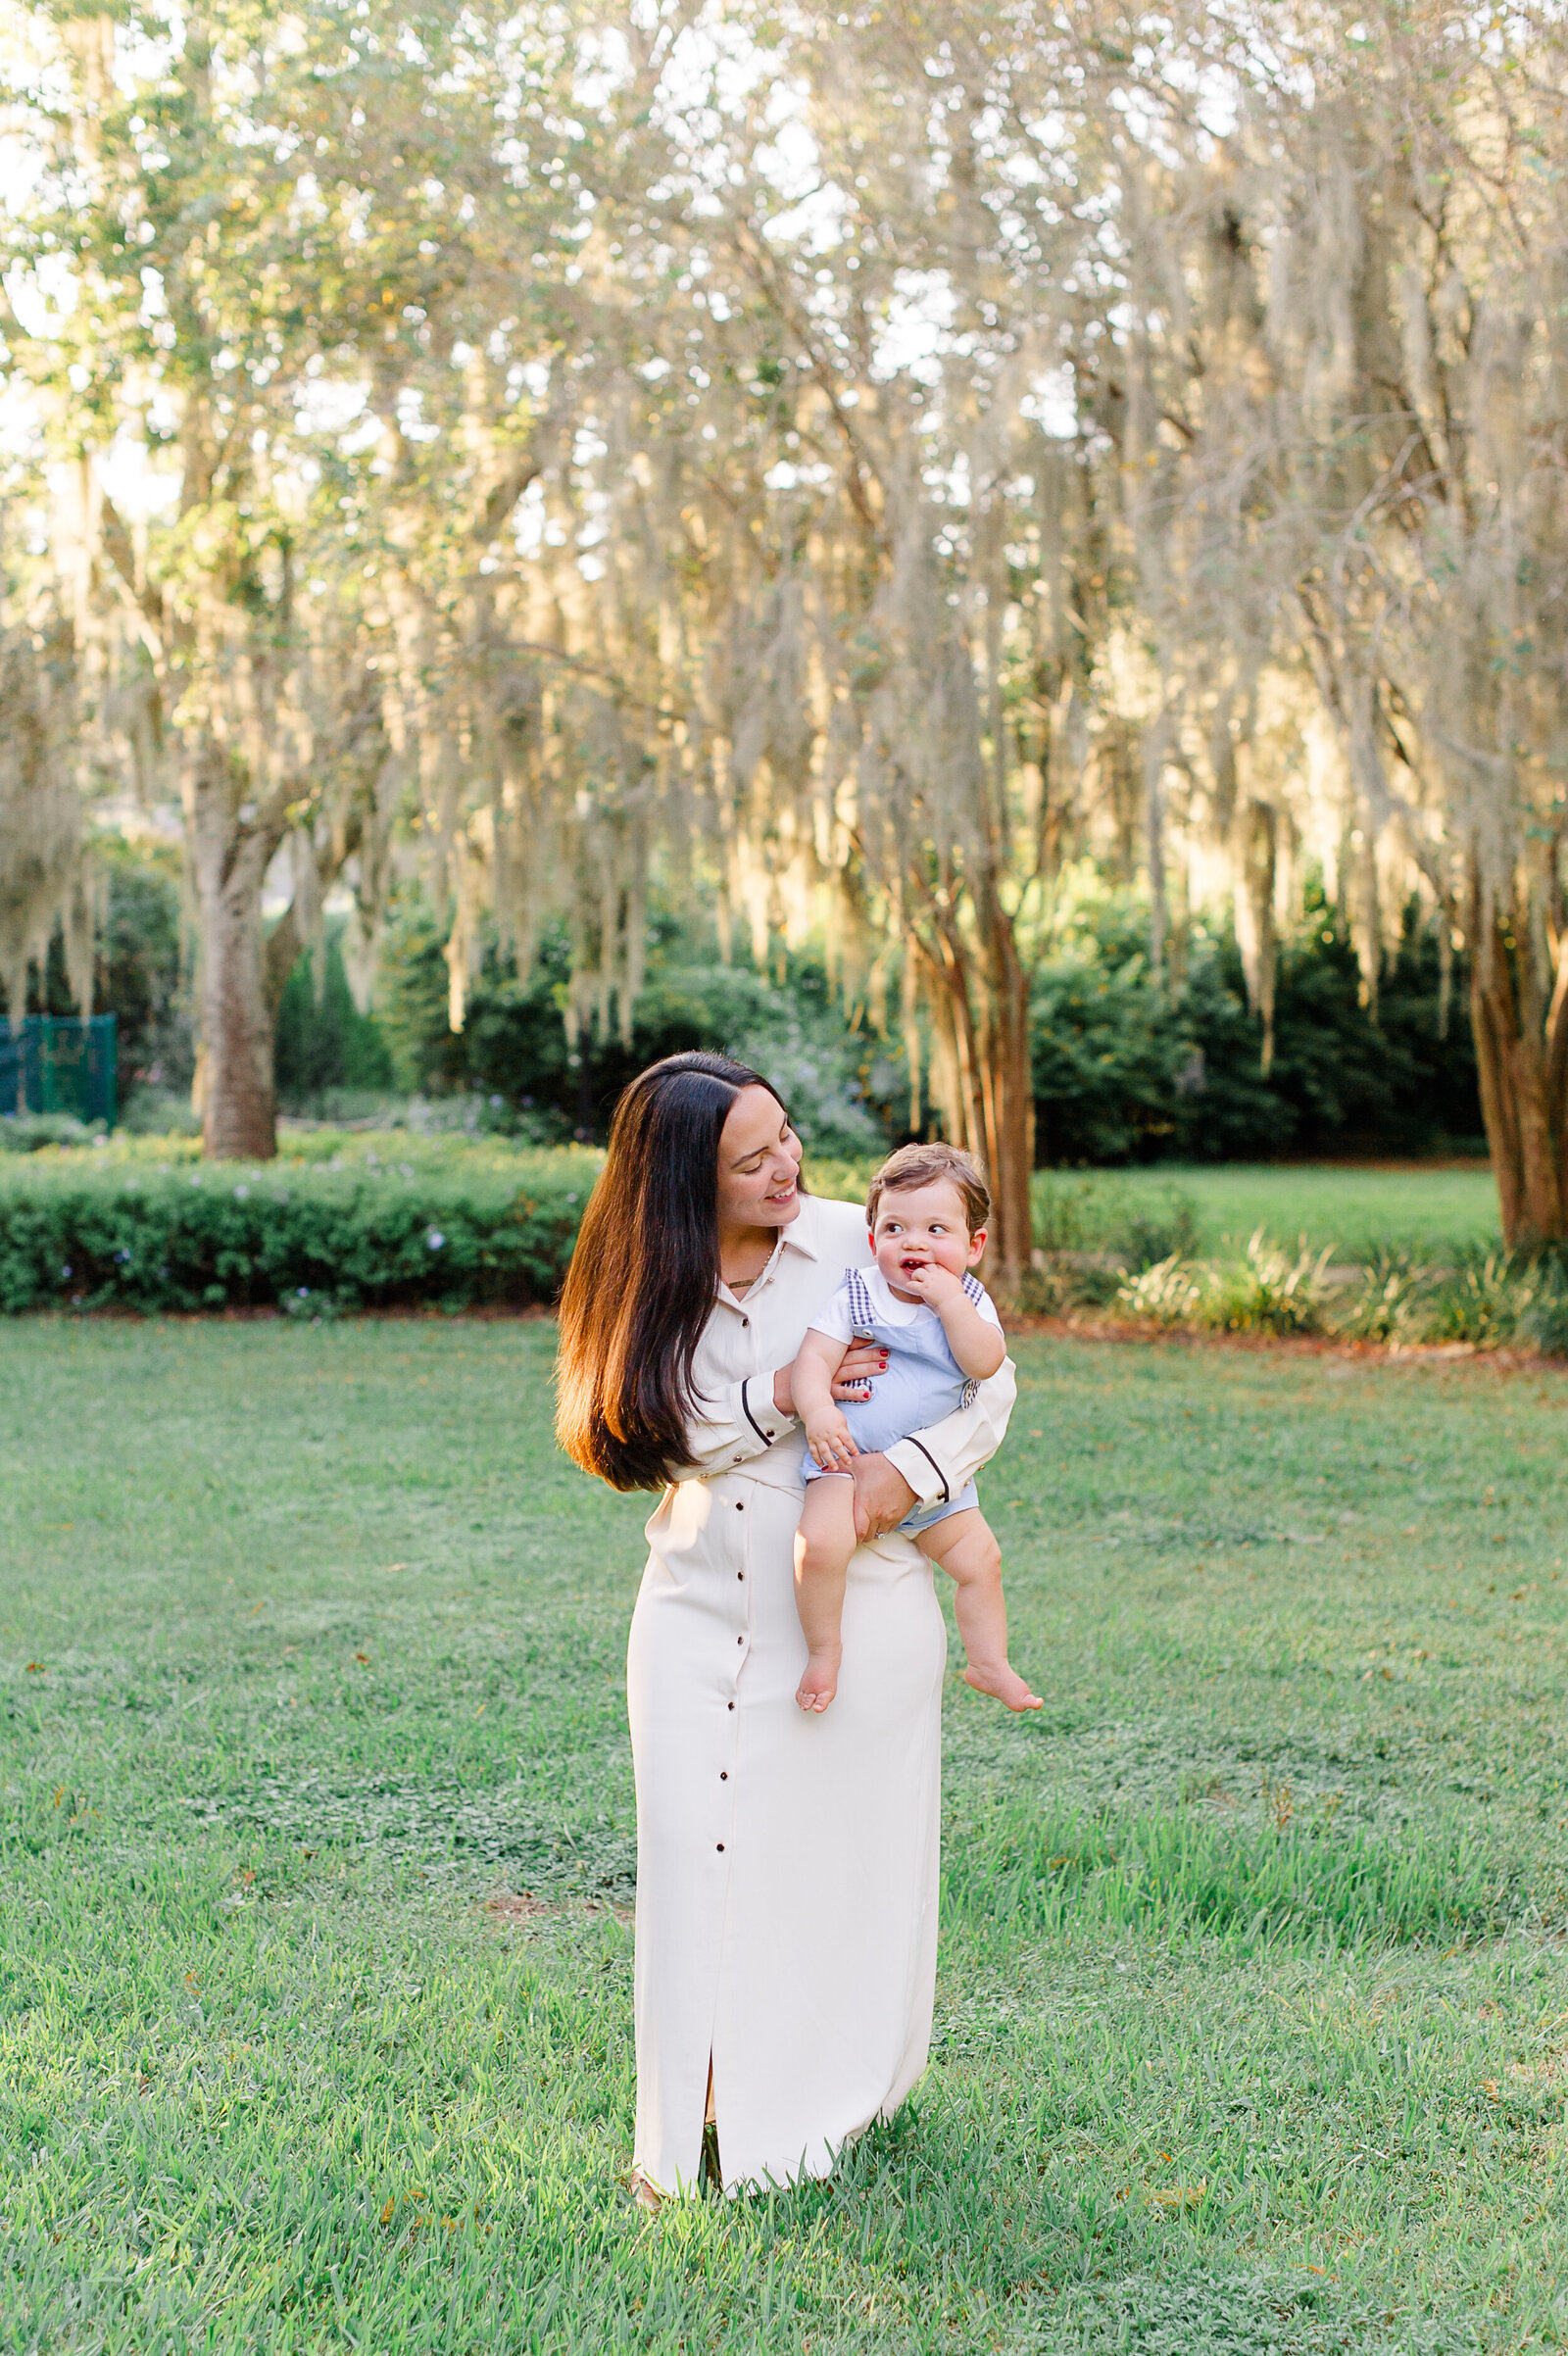 Mom wearing a beautiful white classy dress while holding her cute son in a park in Vero Beach